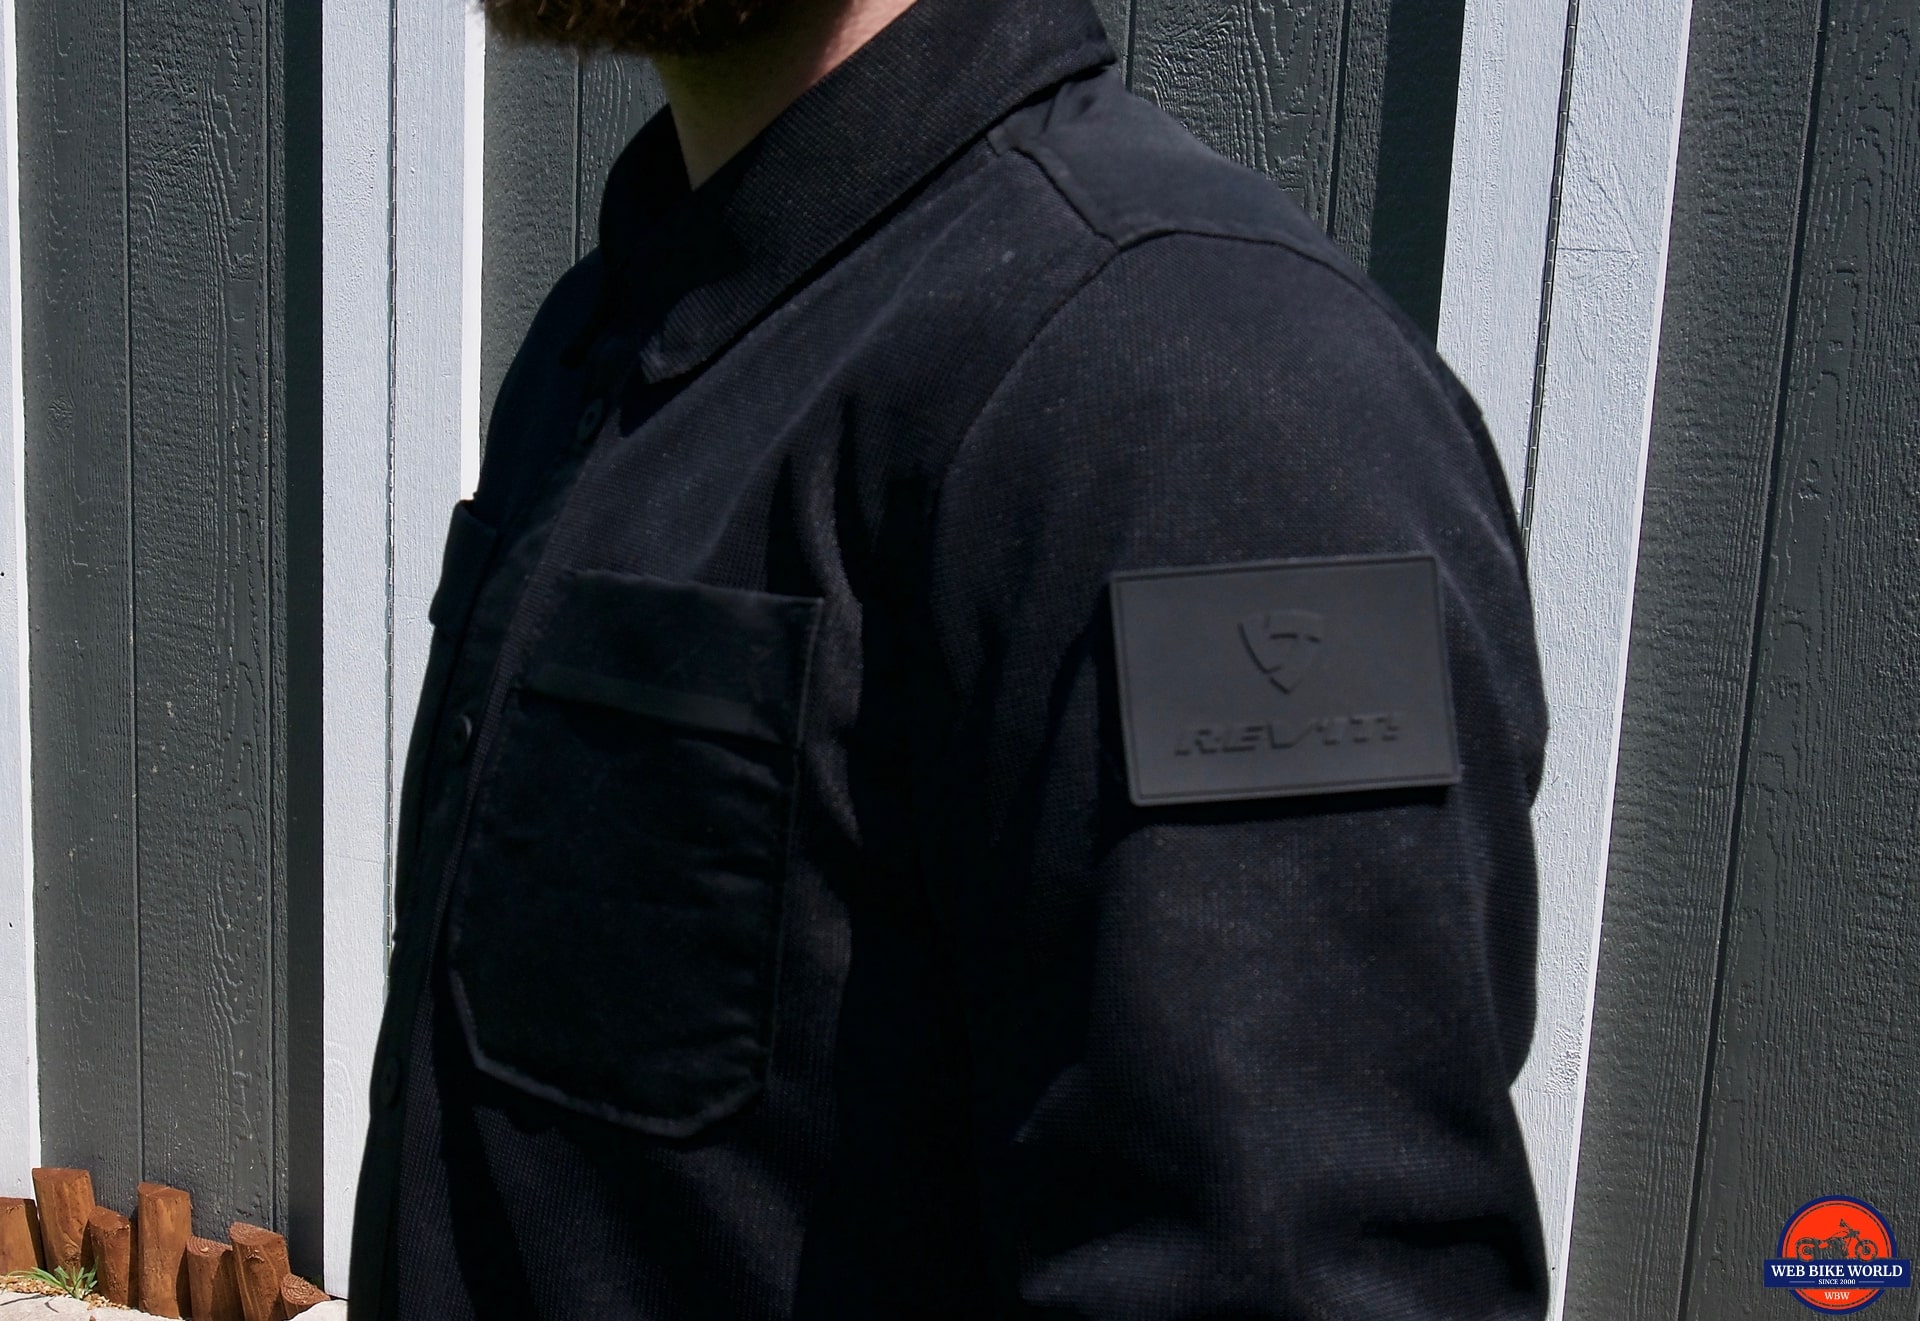 REV’IT! Tracer Air Overshirt: A Lightweight Breathable Jacket